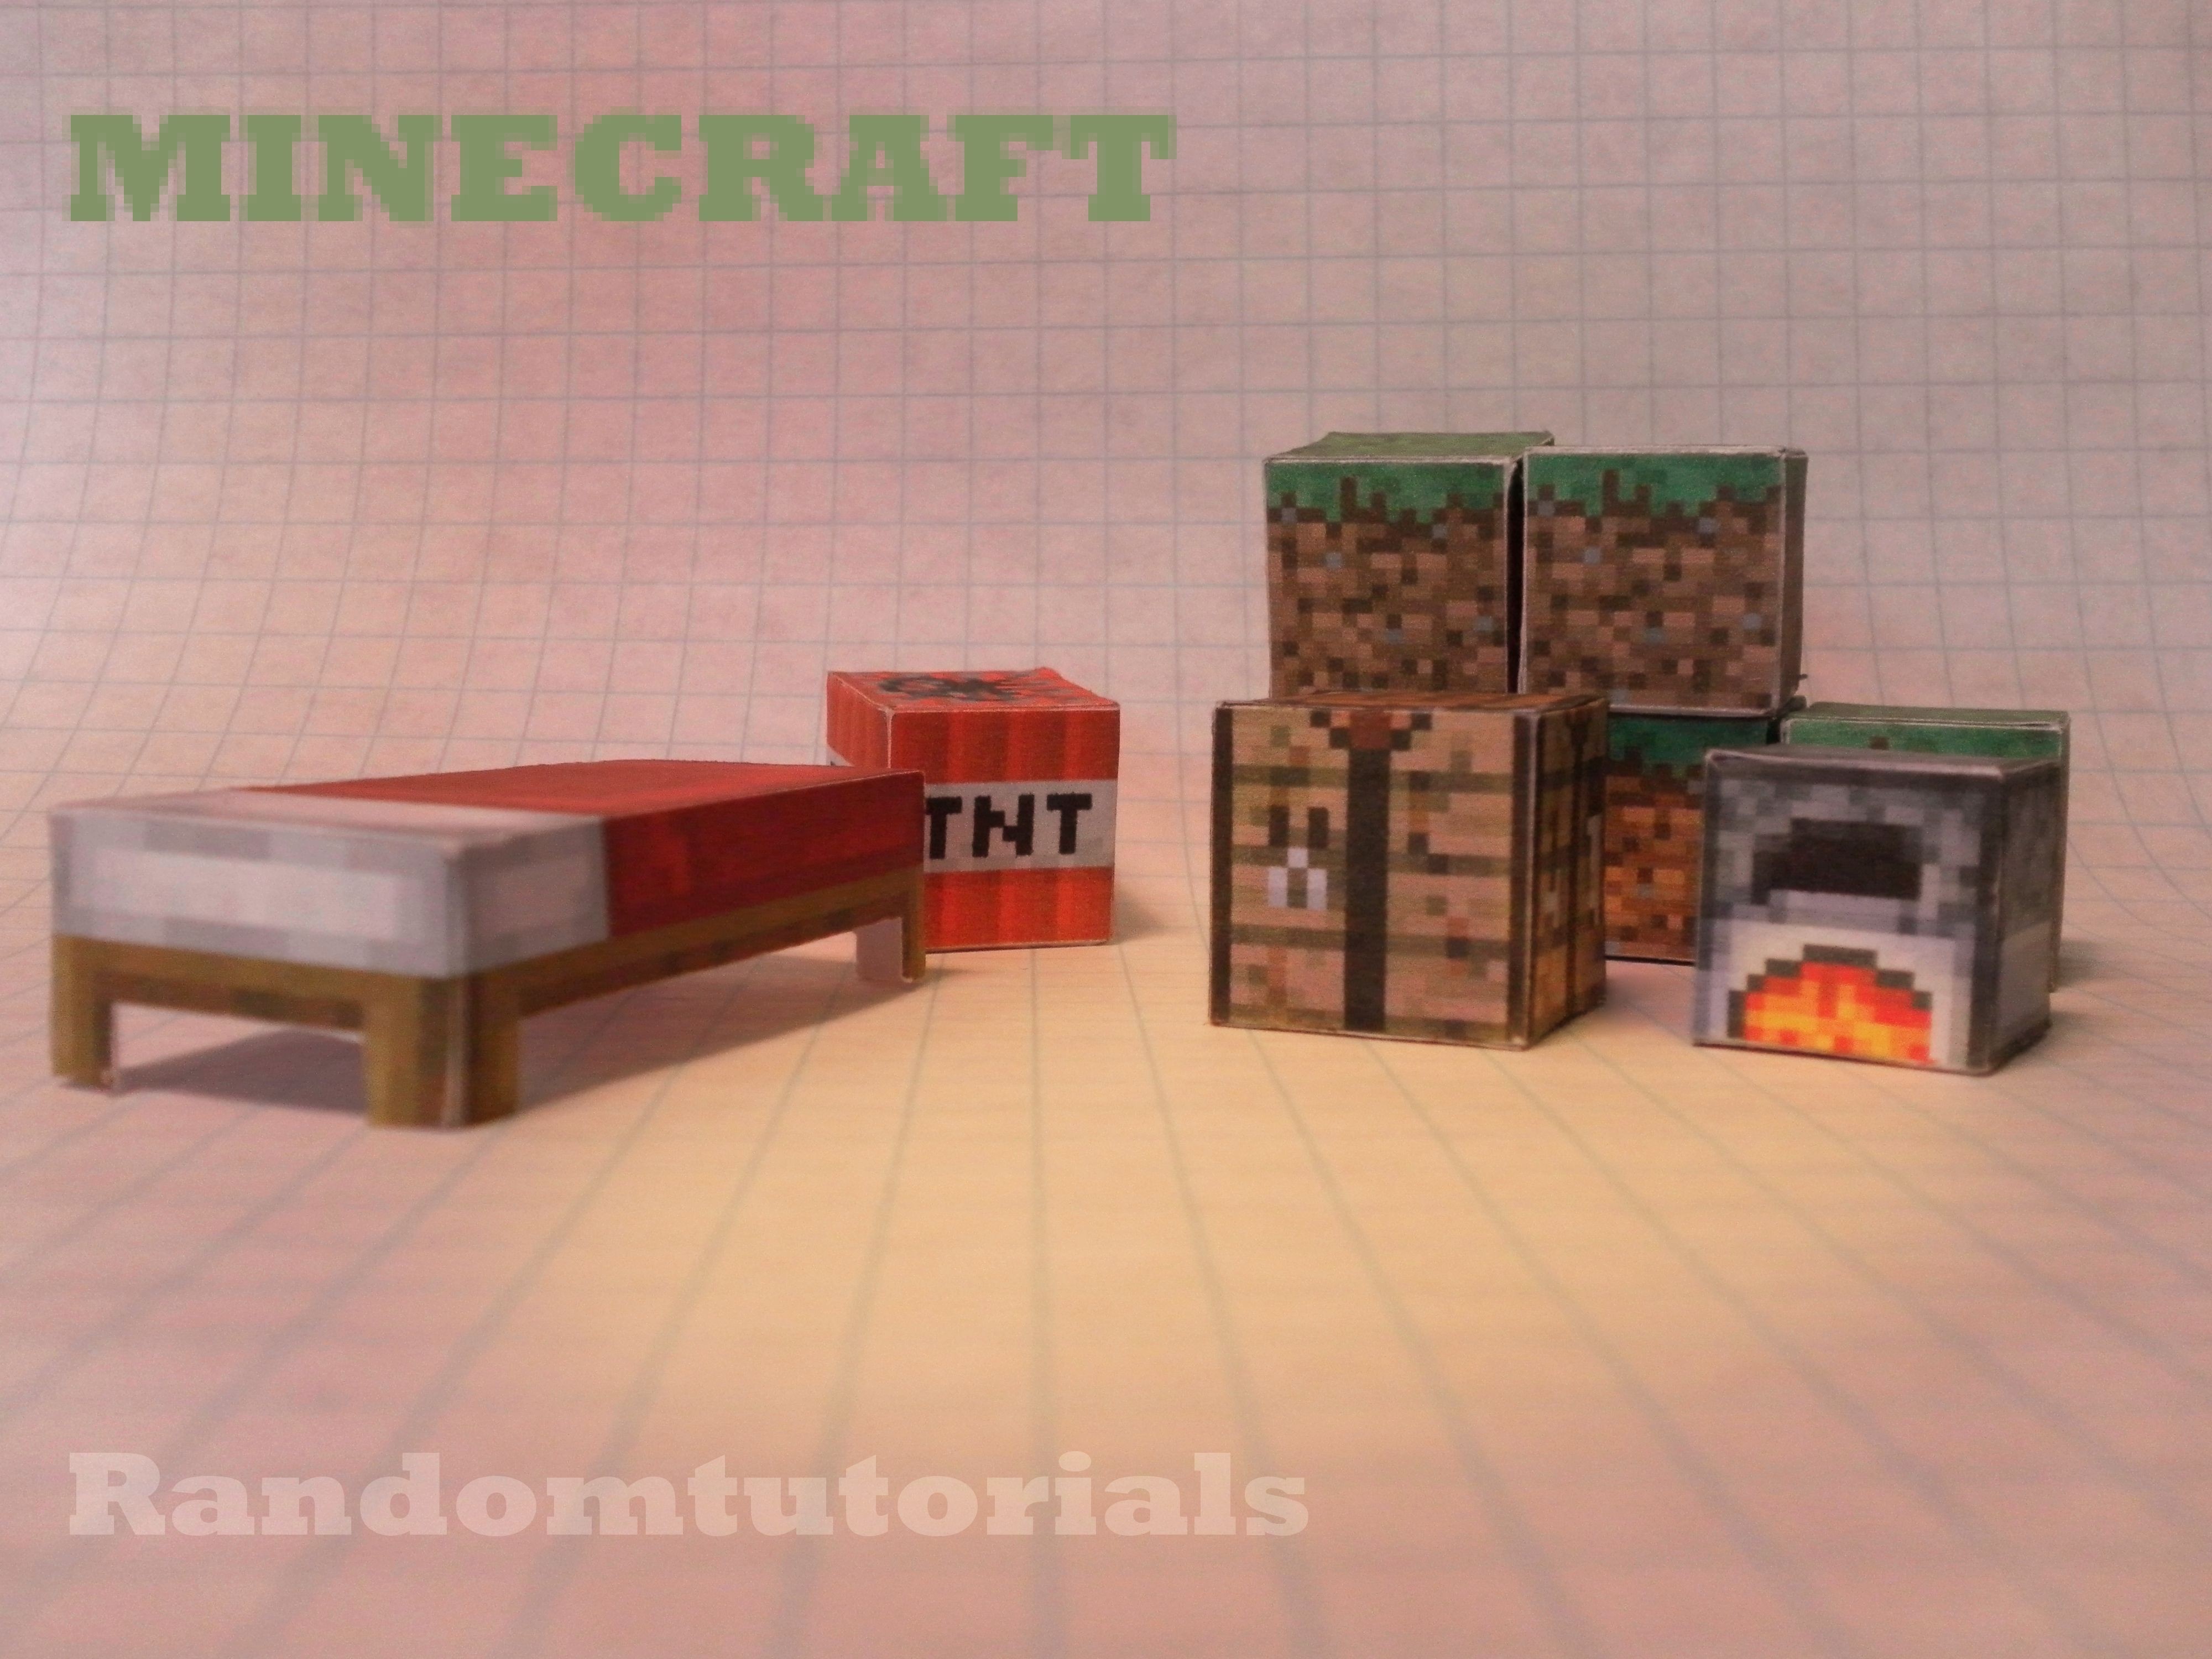 Minecraft Papercraft Review thees Miniature Minecraft Paper Crafts are Fun and Fairly Easy to